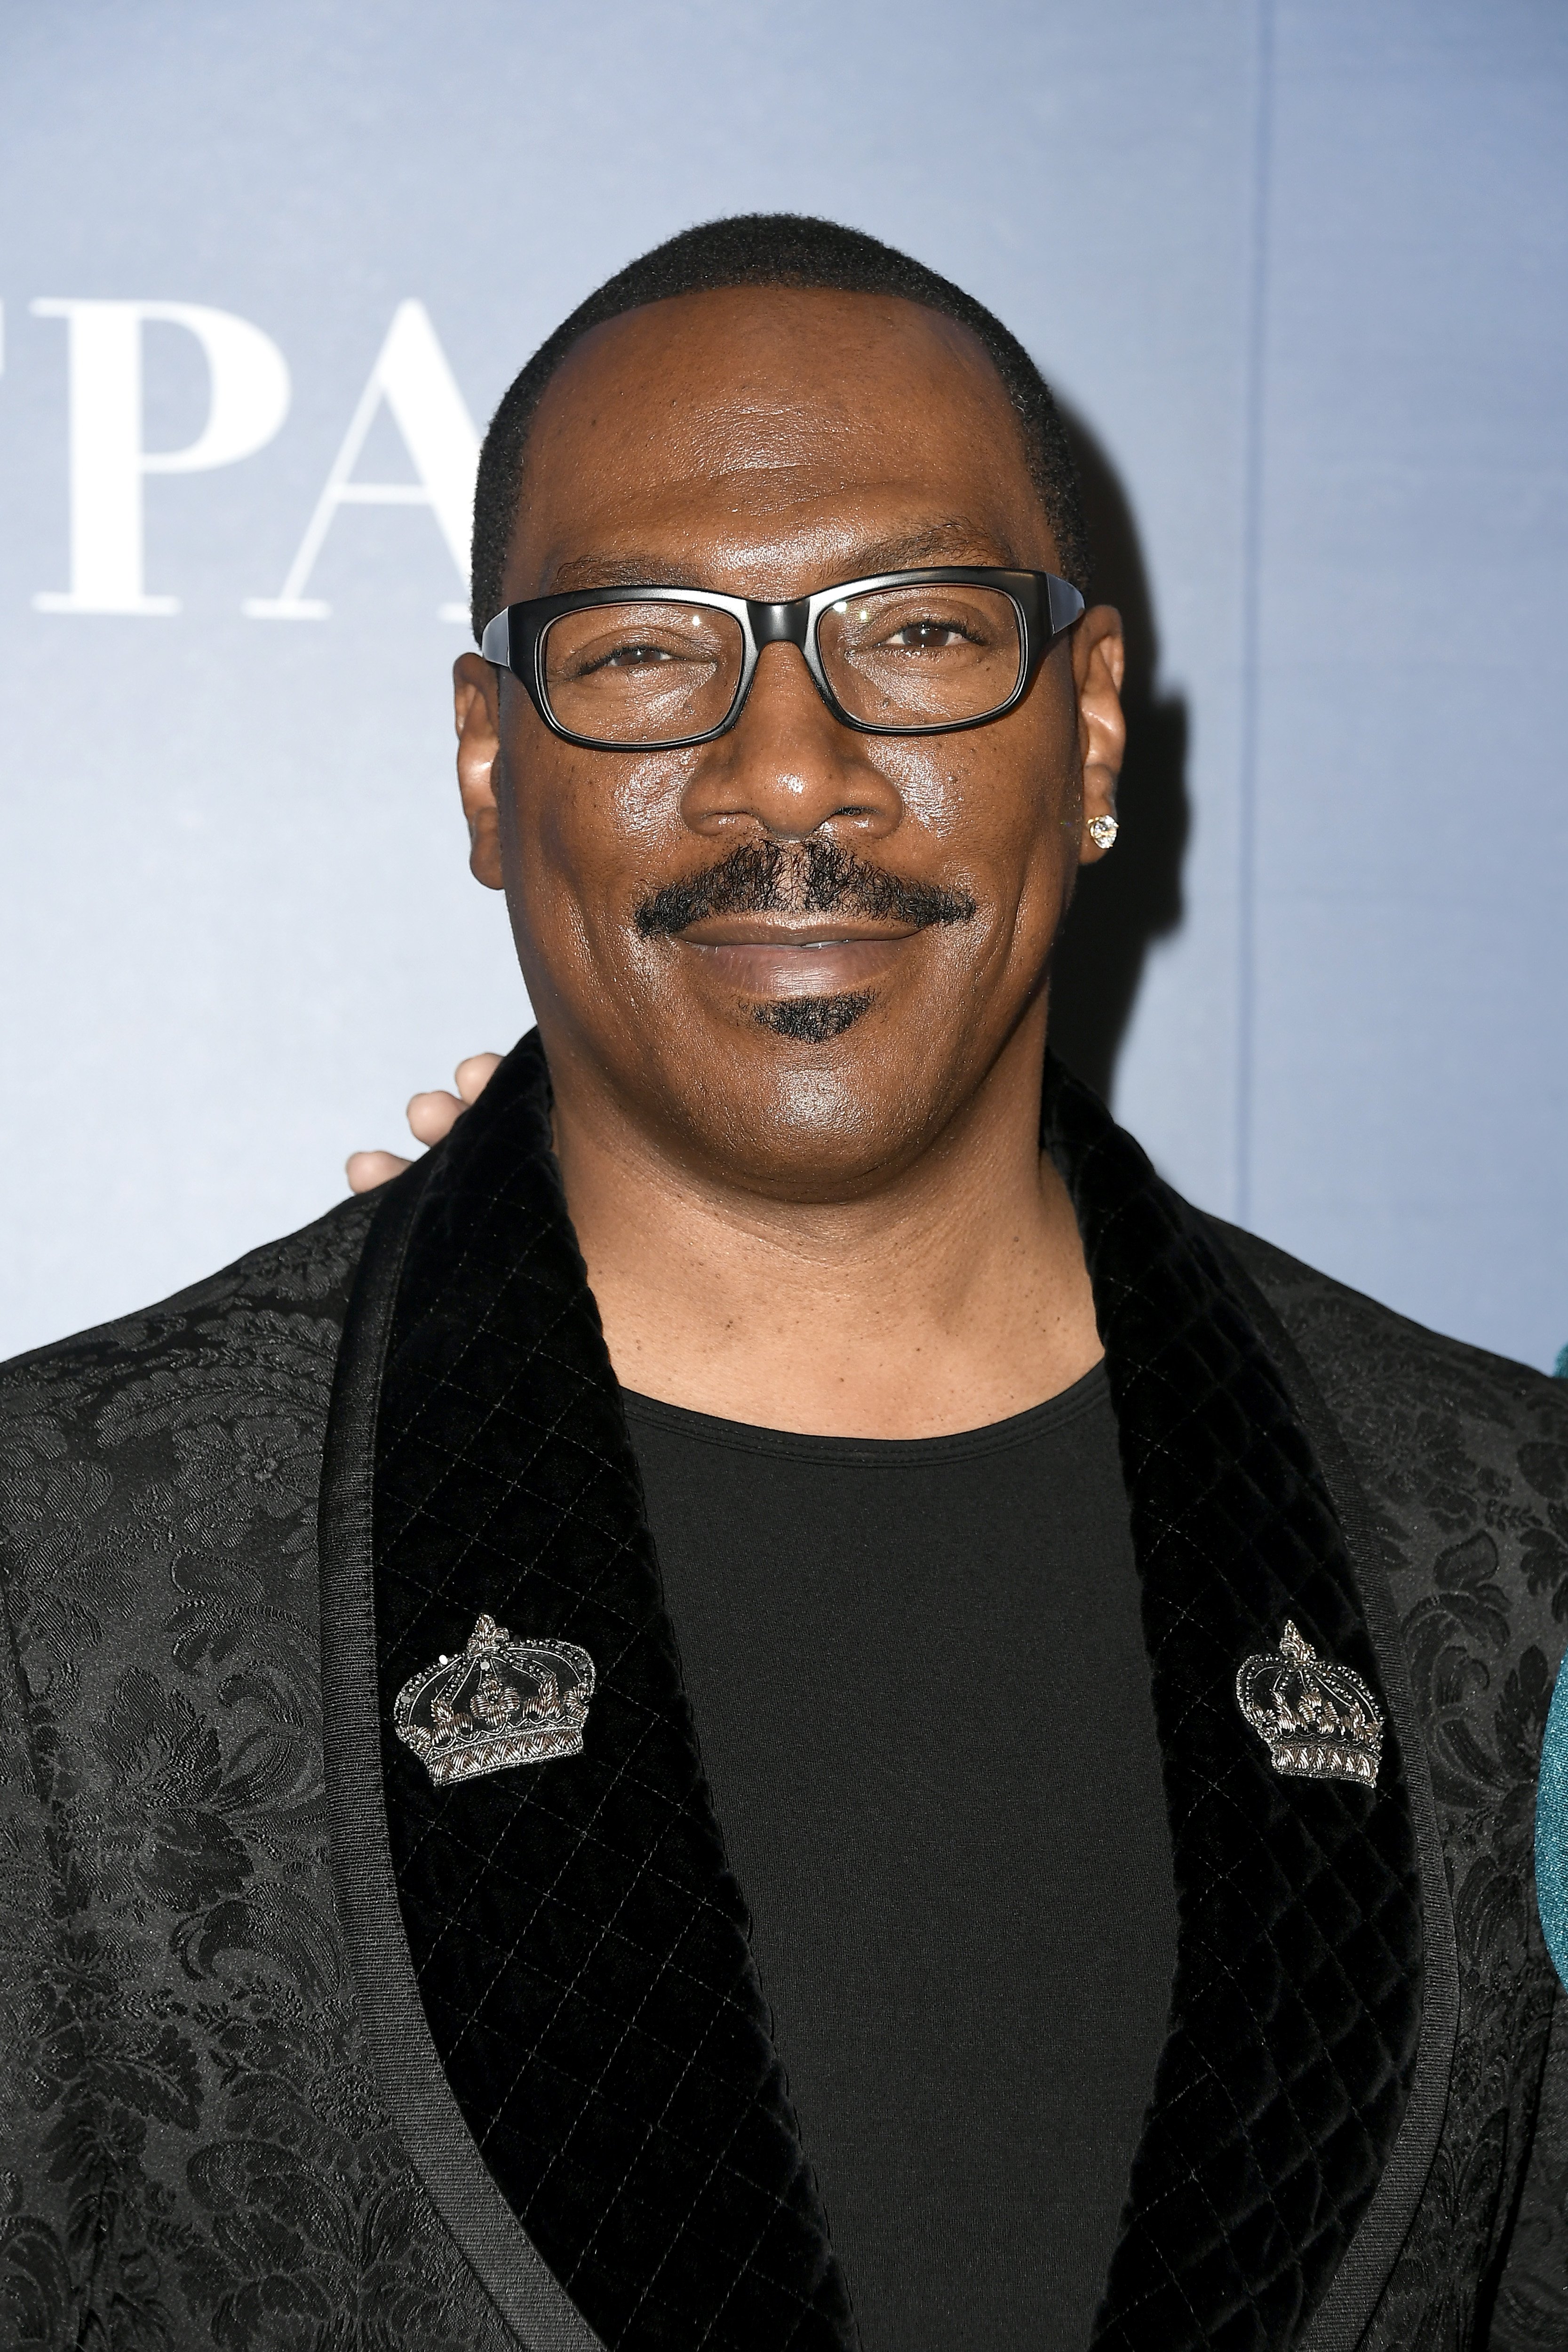 Eddie Murphy Hosts 'Saturday Night Live' for the Very First Time in 35